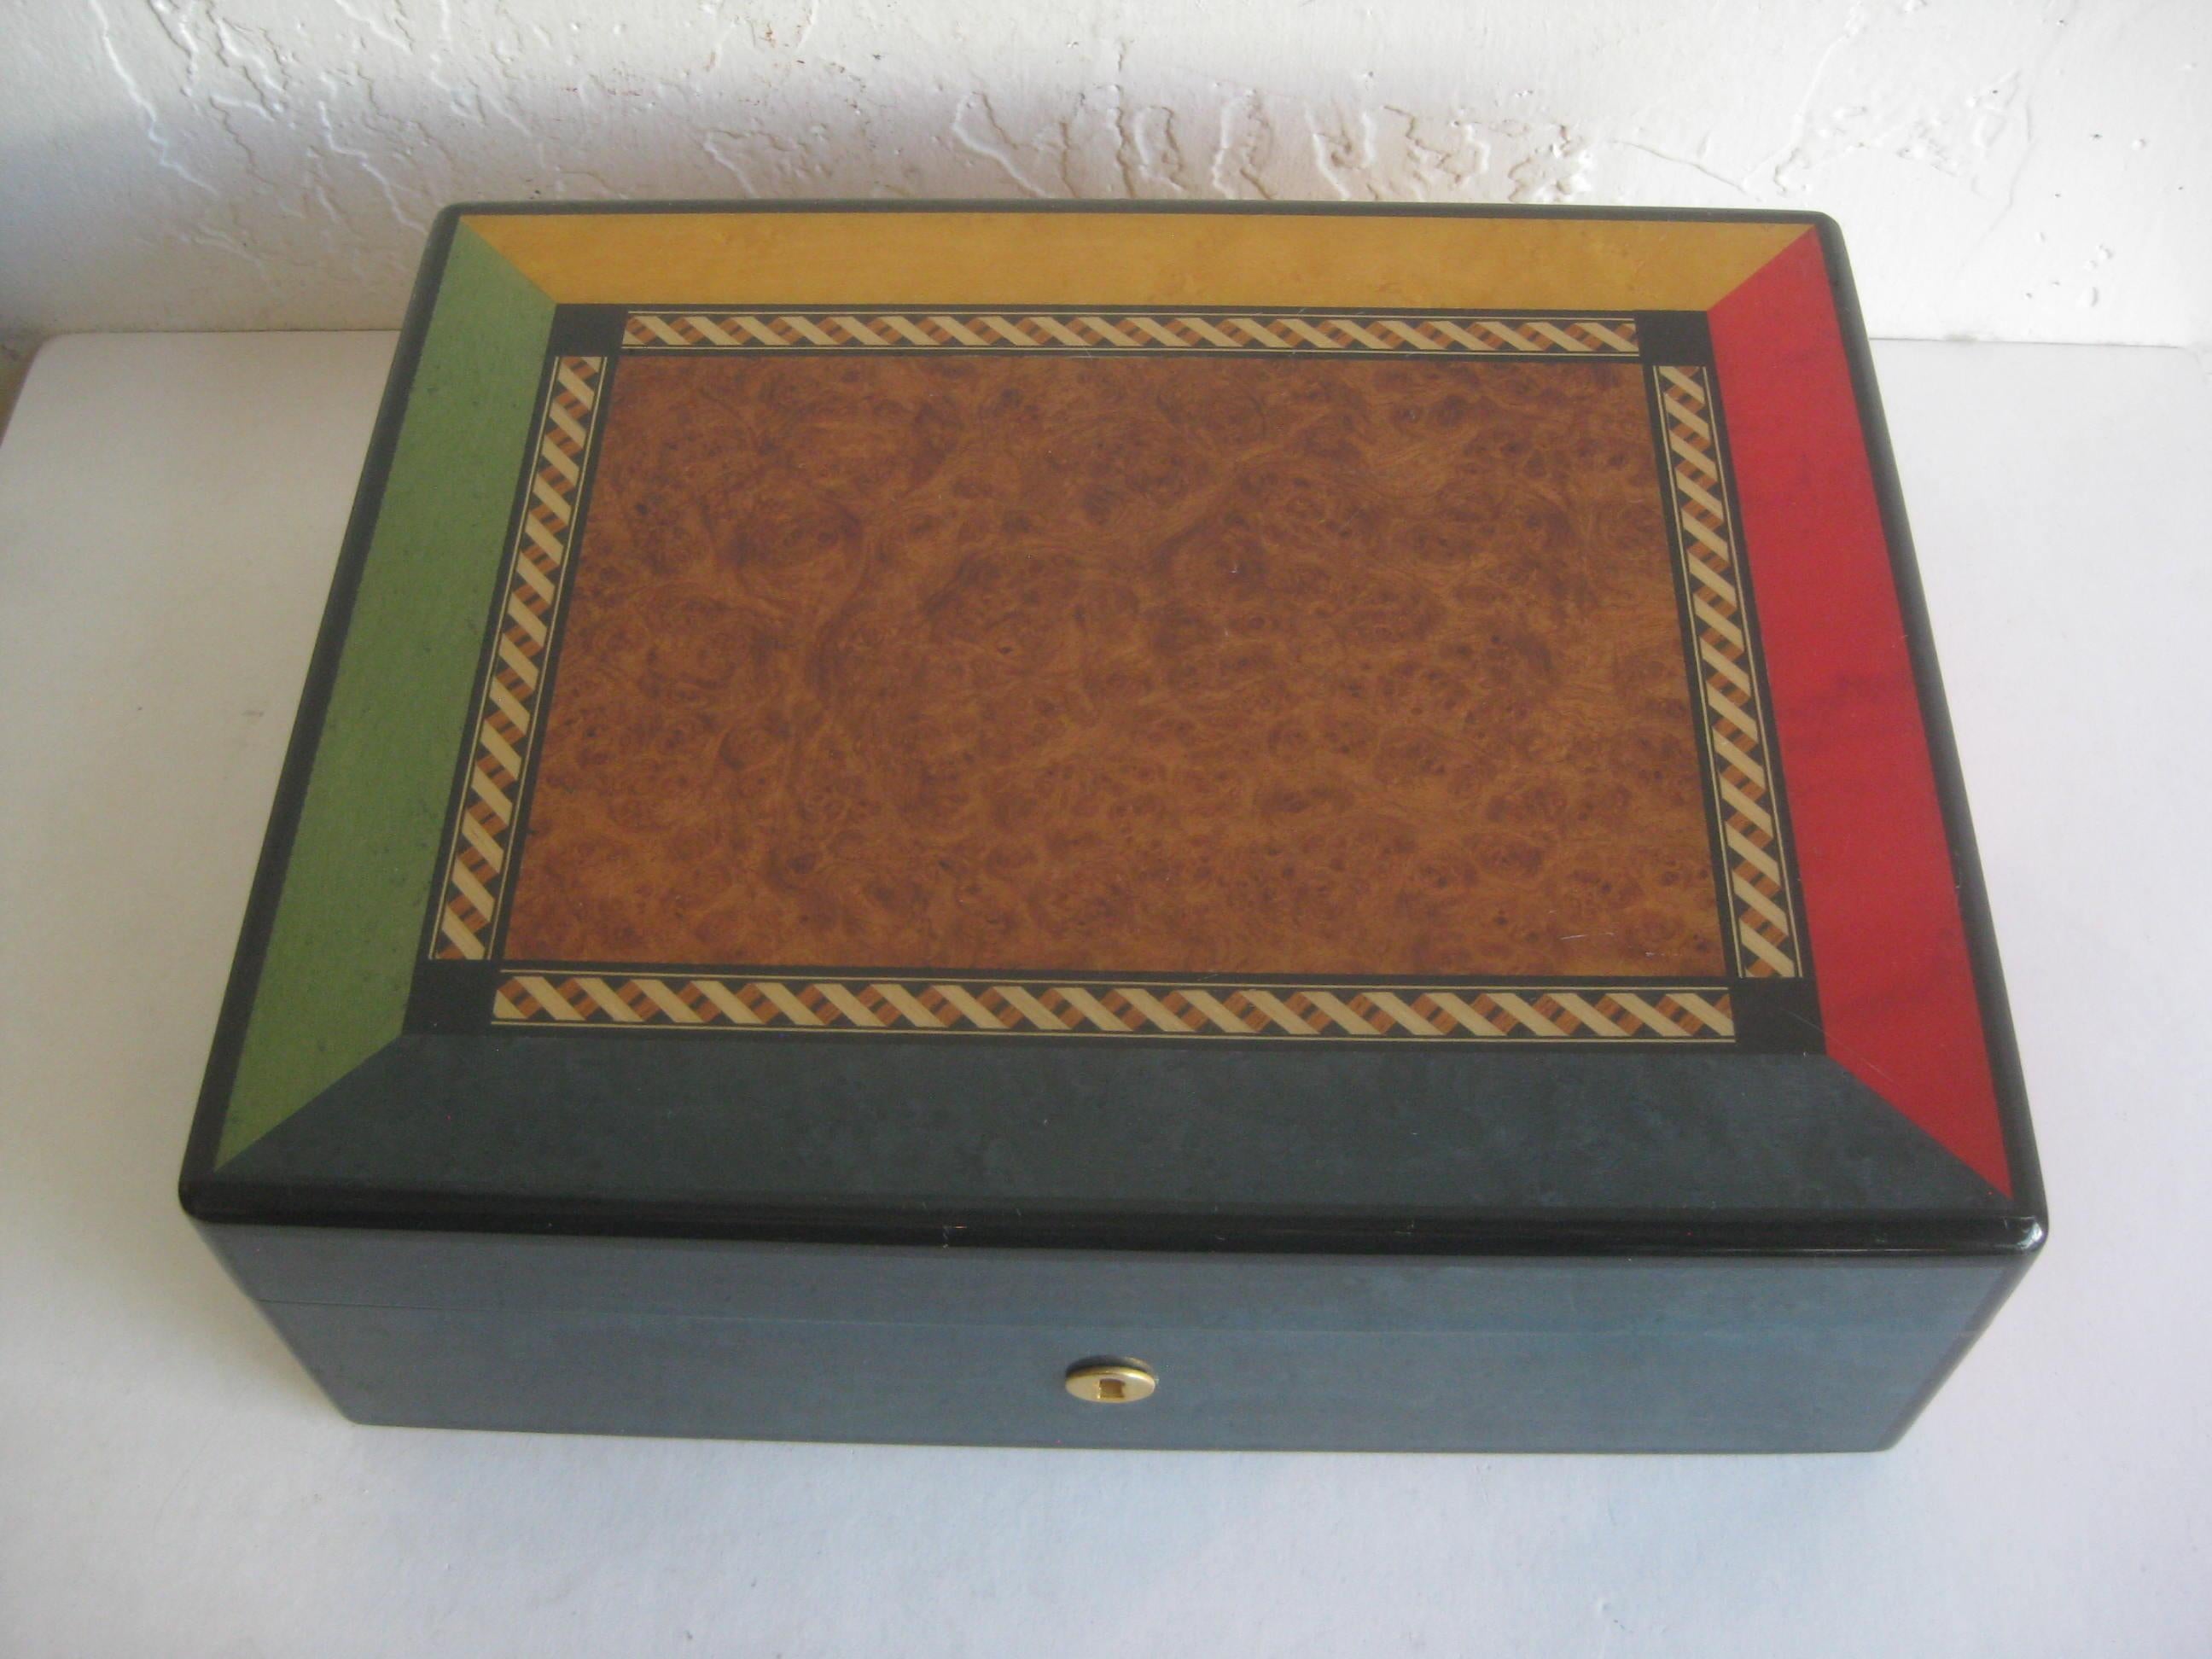 Elegant Triade French cigar tobacco humidor box. Beautiful color inlay with burl wood in the center of the top. Clear lacquer finish. The box is made of solid mahogany. The key is missing. In very nice shape with some minor surface scratches and